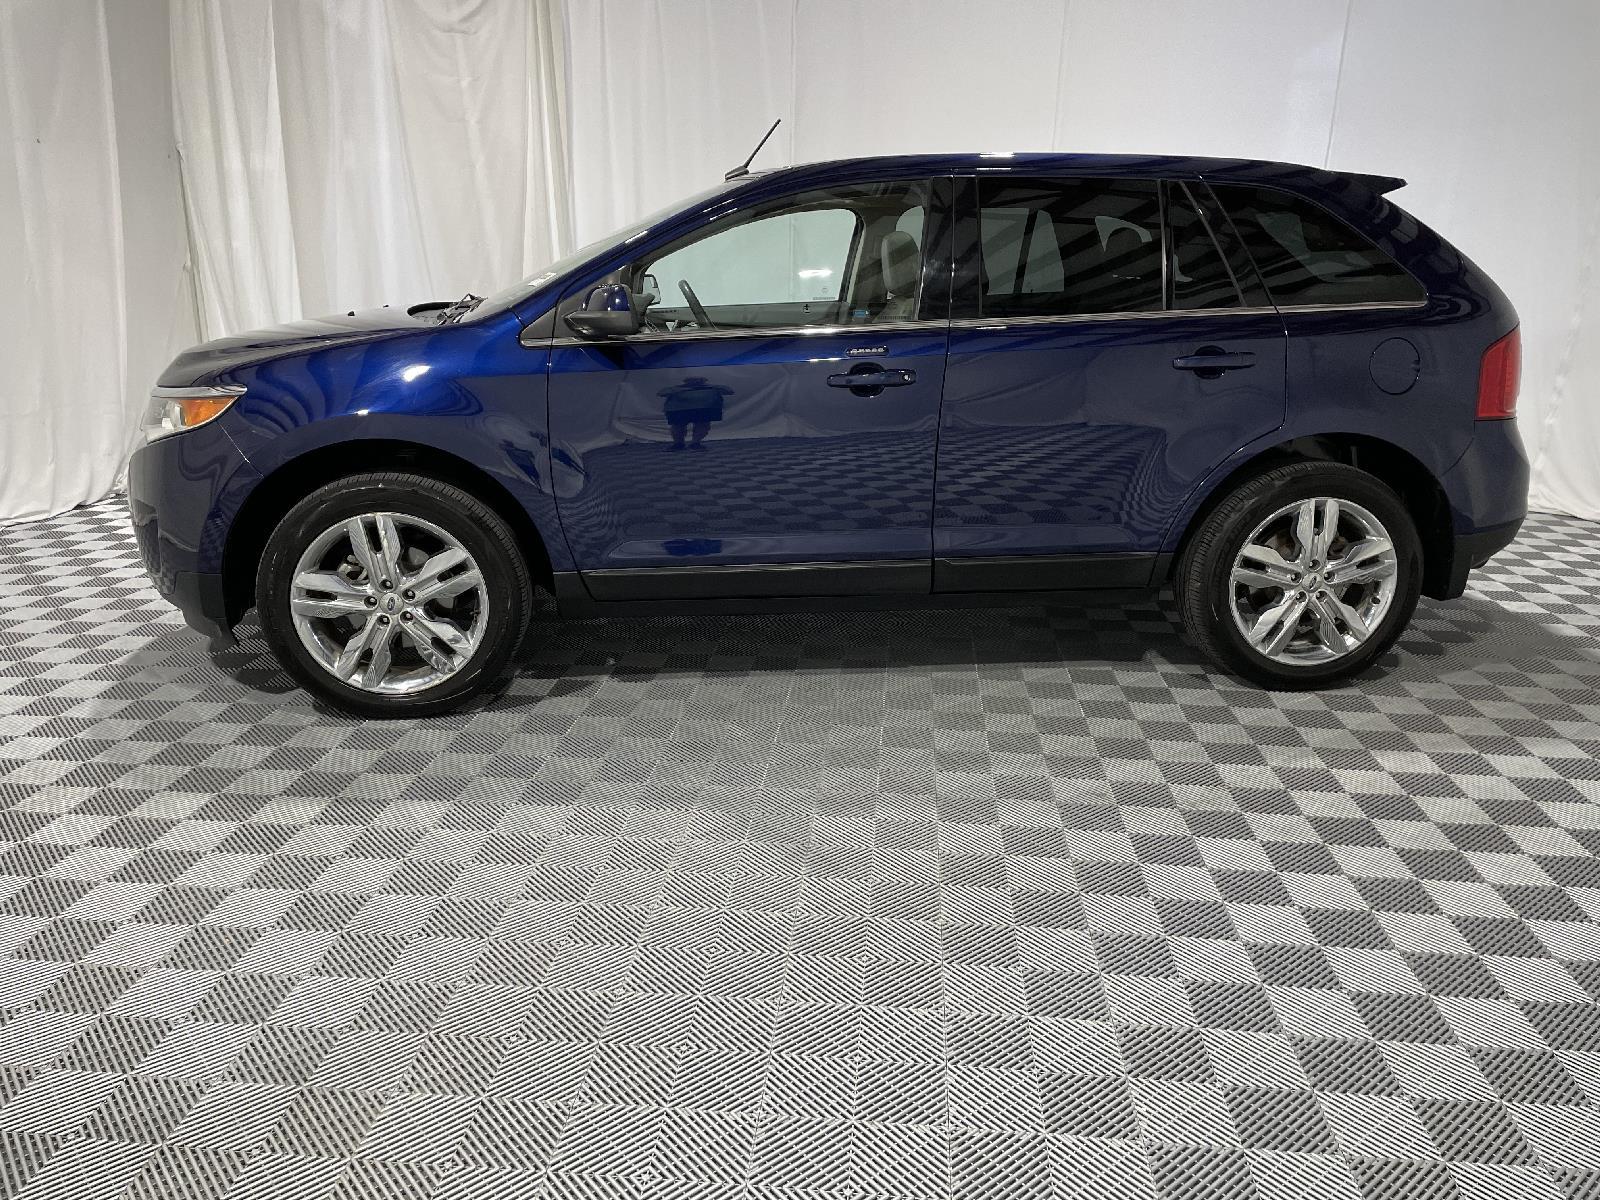 Used 2011 Ford Edge Limited SUV for sale in St Joseph MO